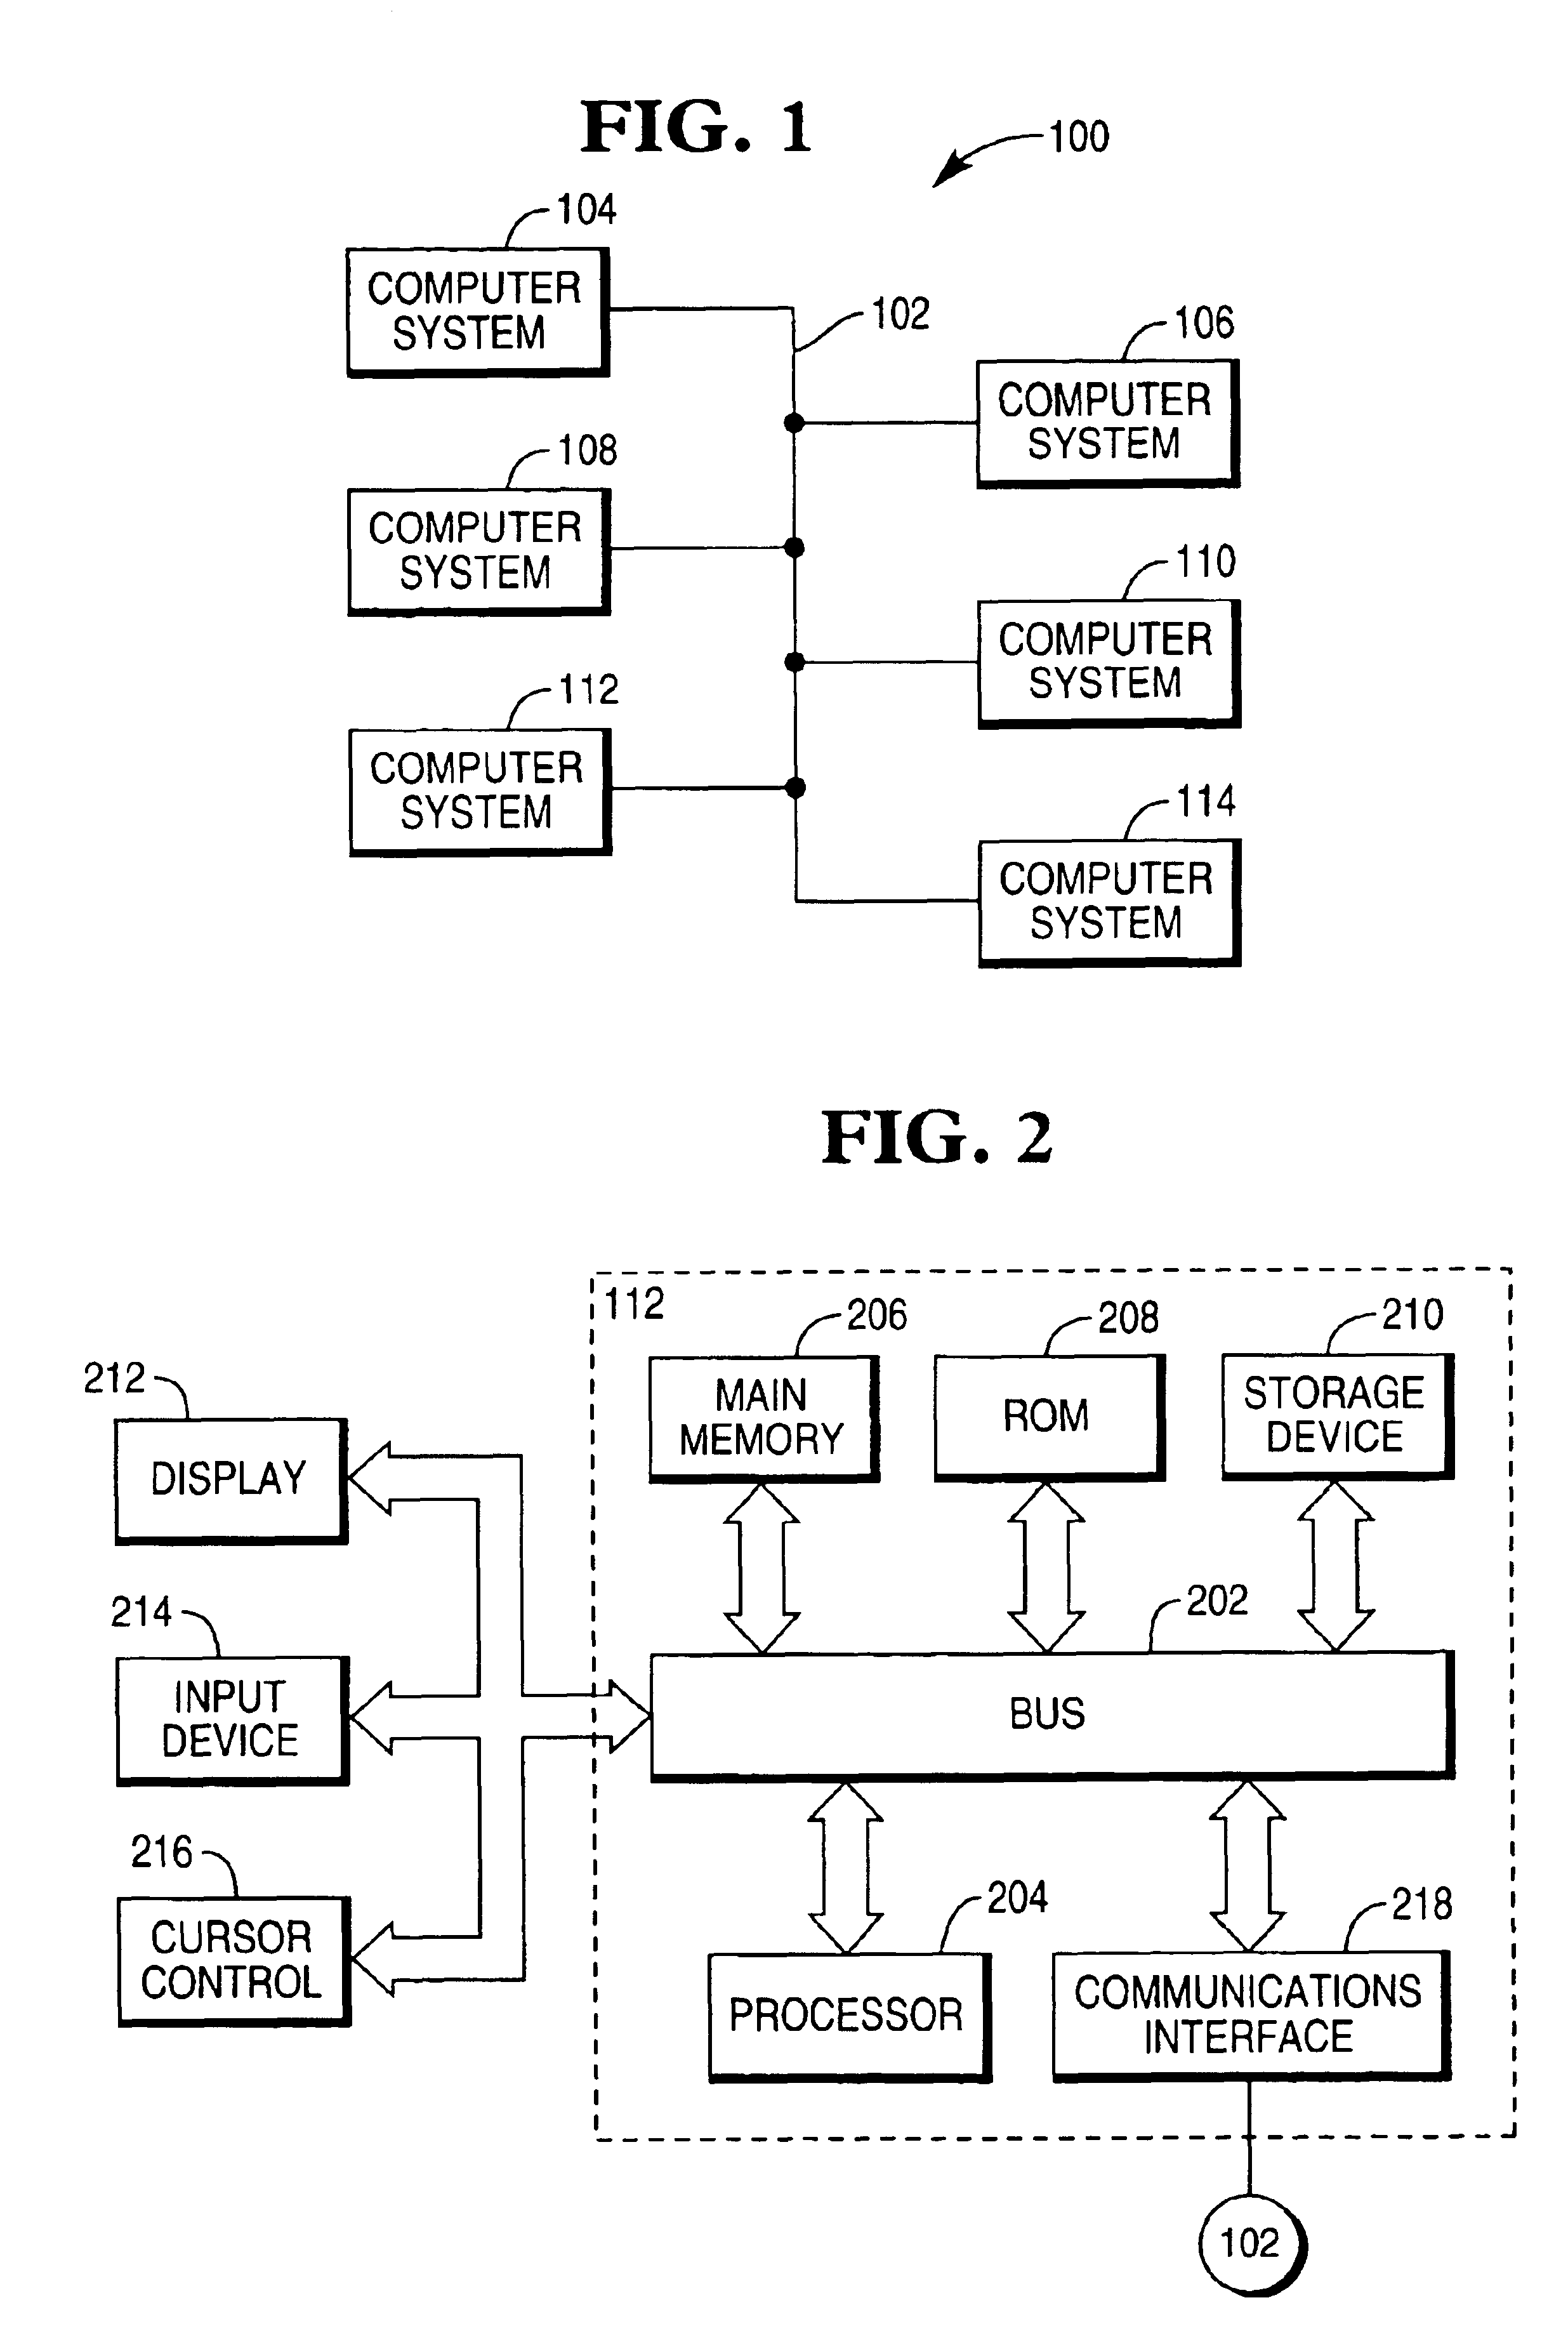 Method and apparatus for allocating network resources and changing the allocation based on dynamic workload changes